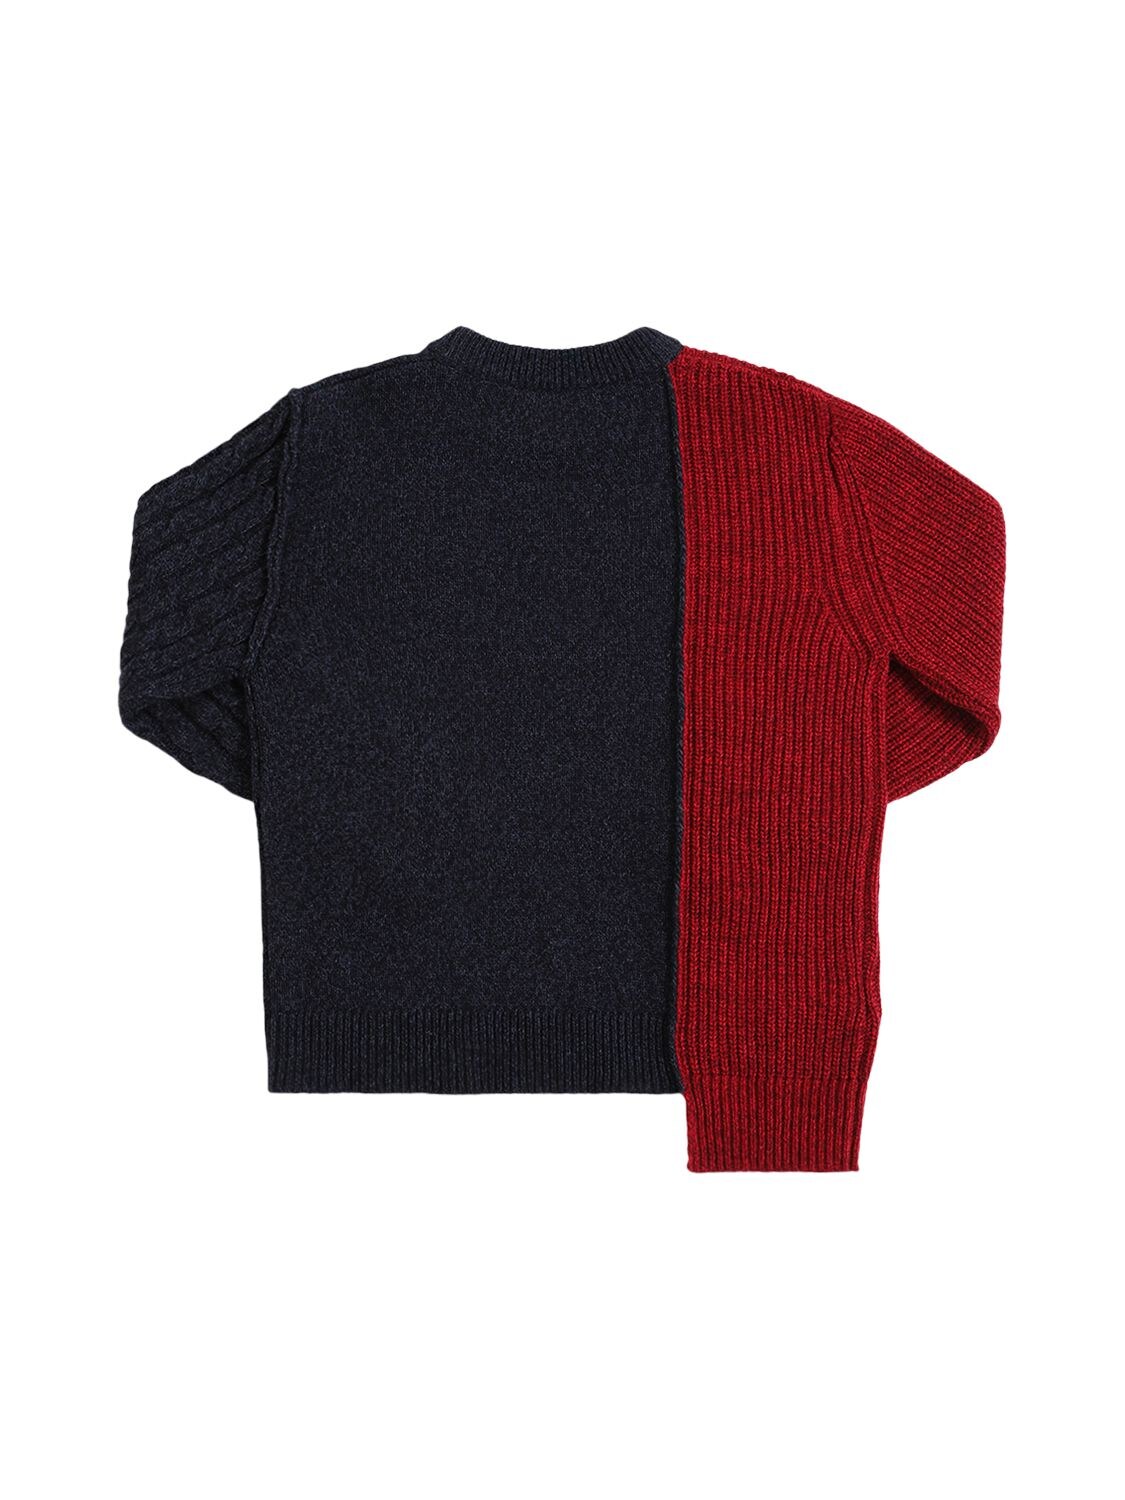 Shop Marni Junior Color Block Wool Blend Sweater W/logo In Navy,red